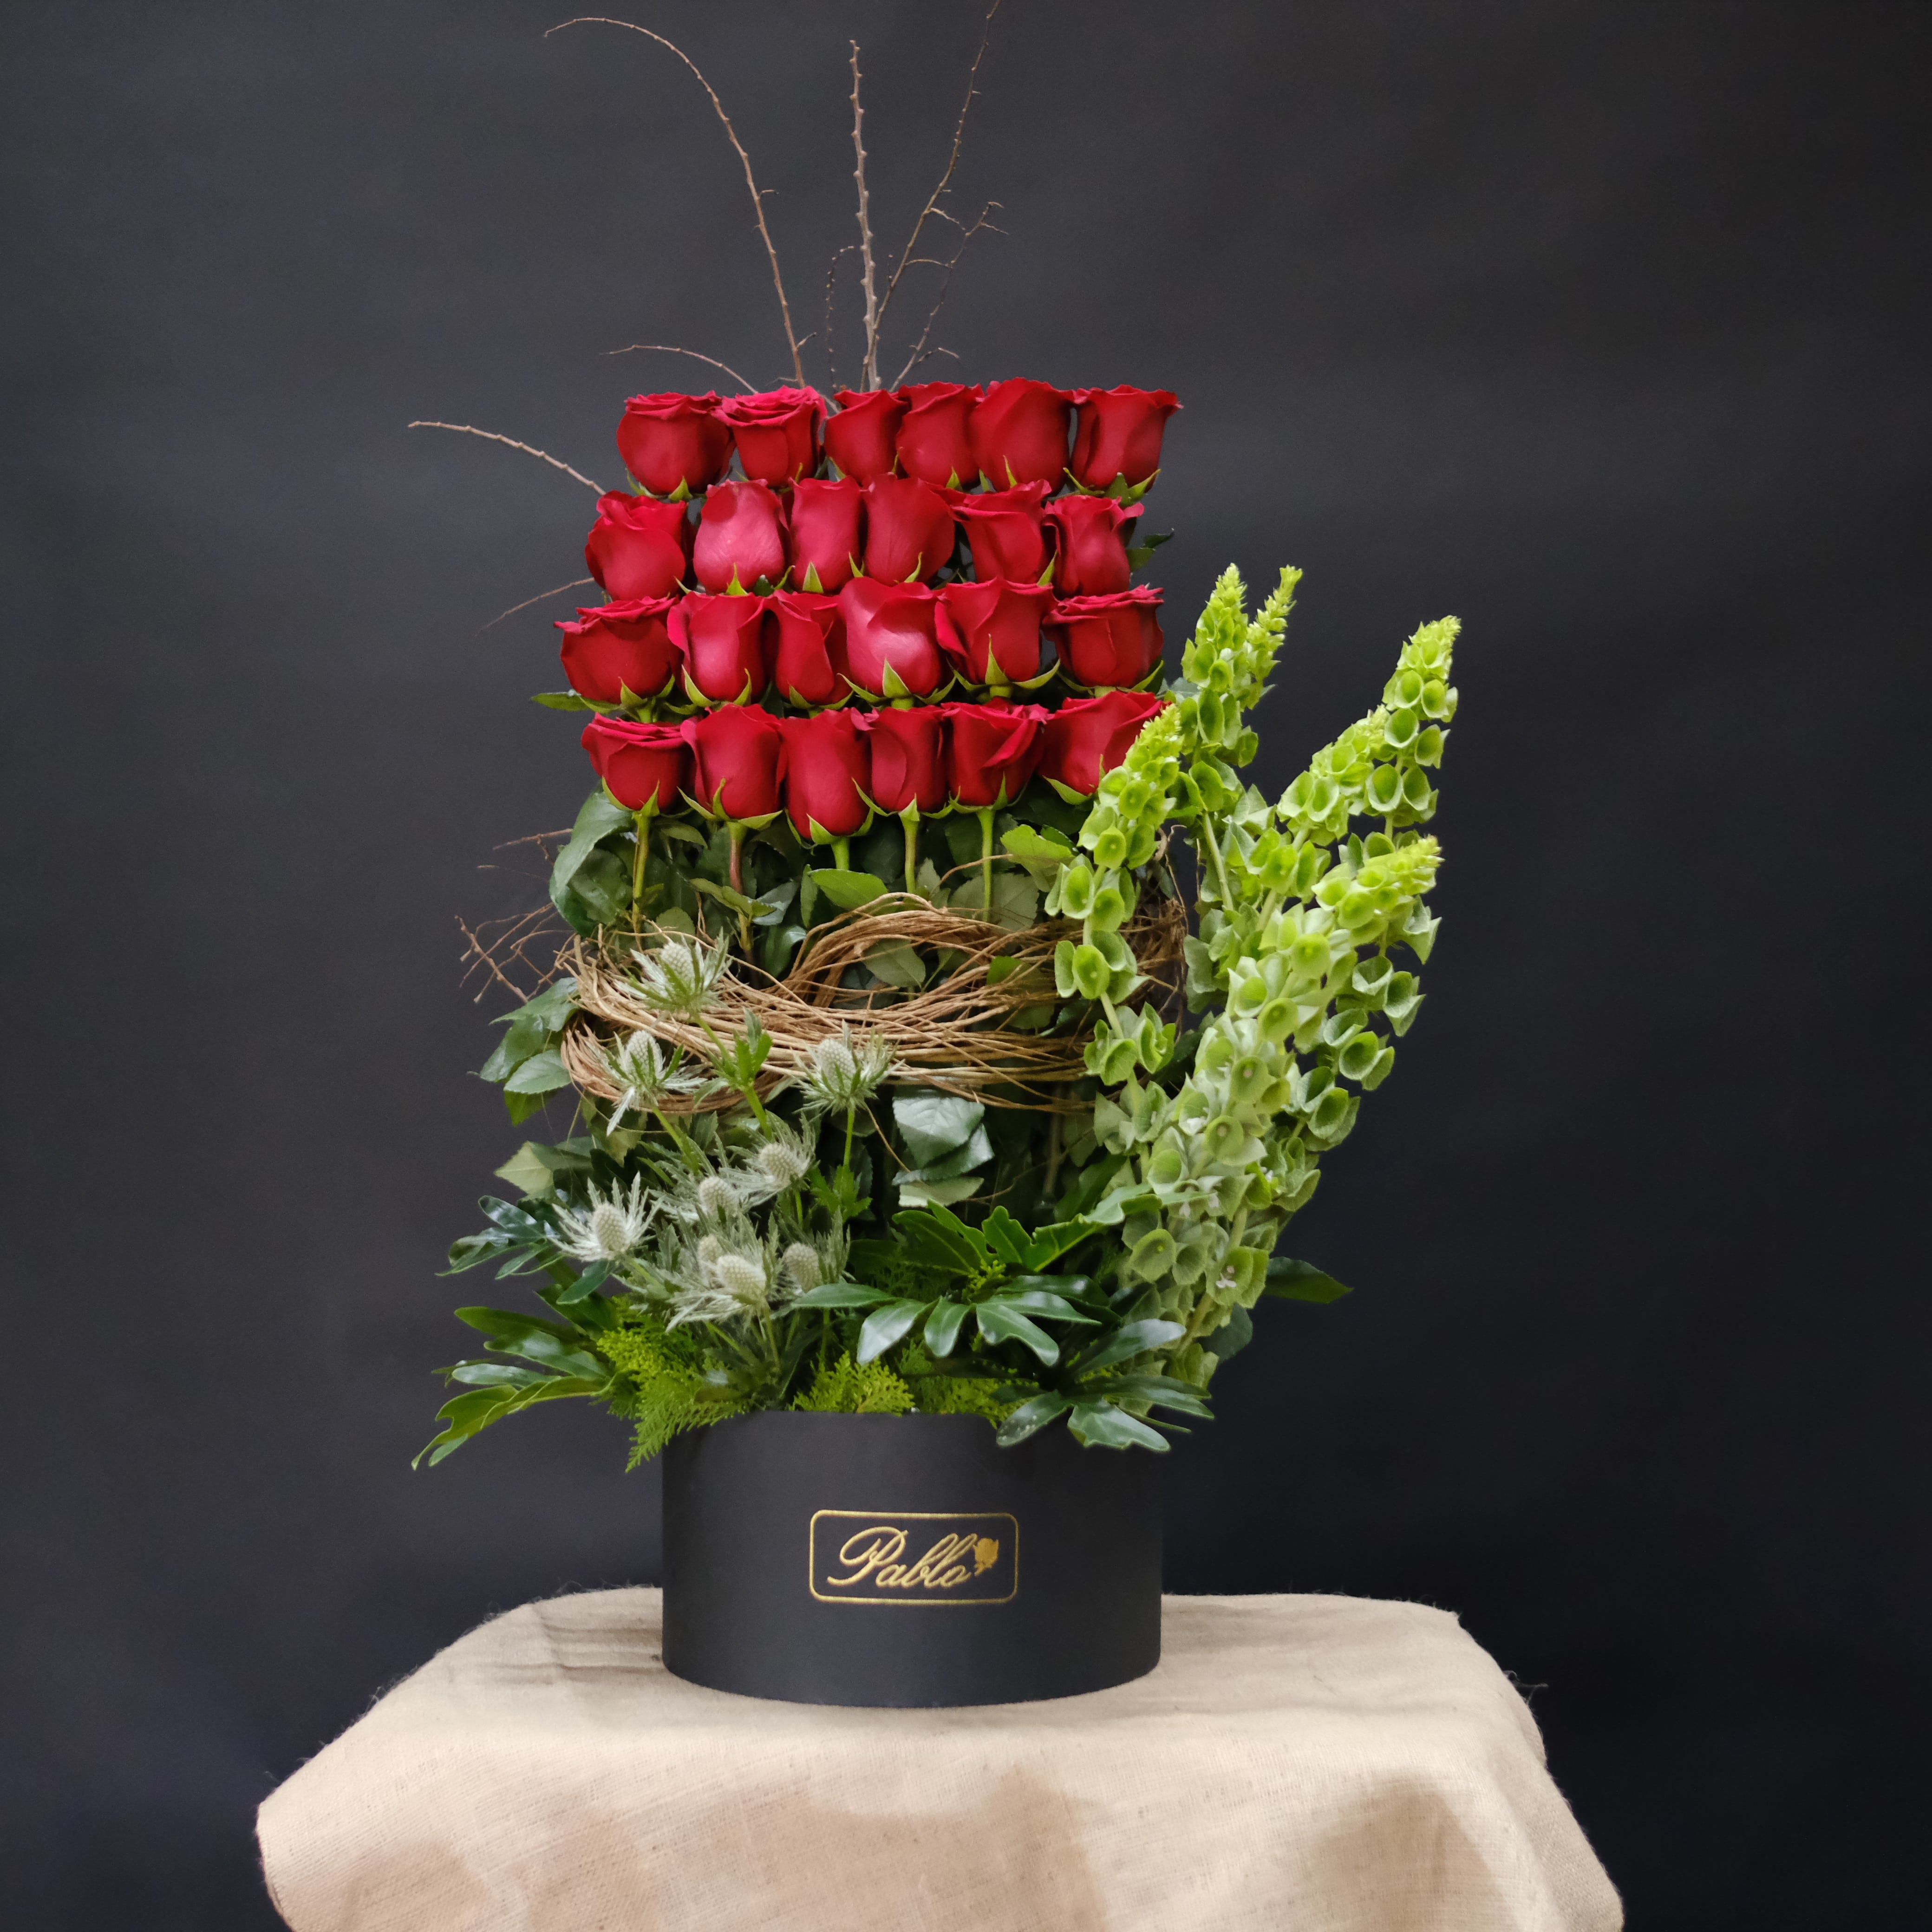 Fiery 60 Red Roses Stems Bouquet - Pablo Gift Shop - Pablo Gift Shop